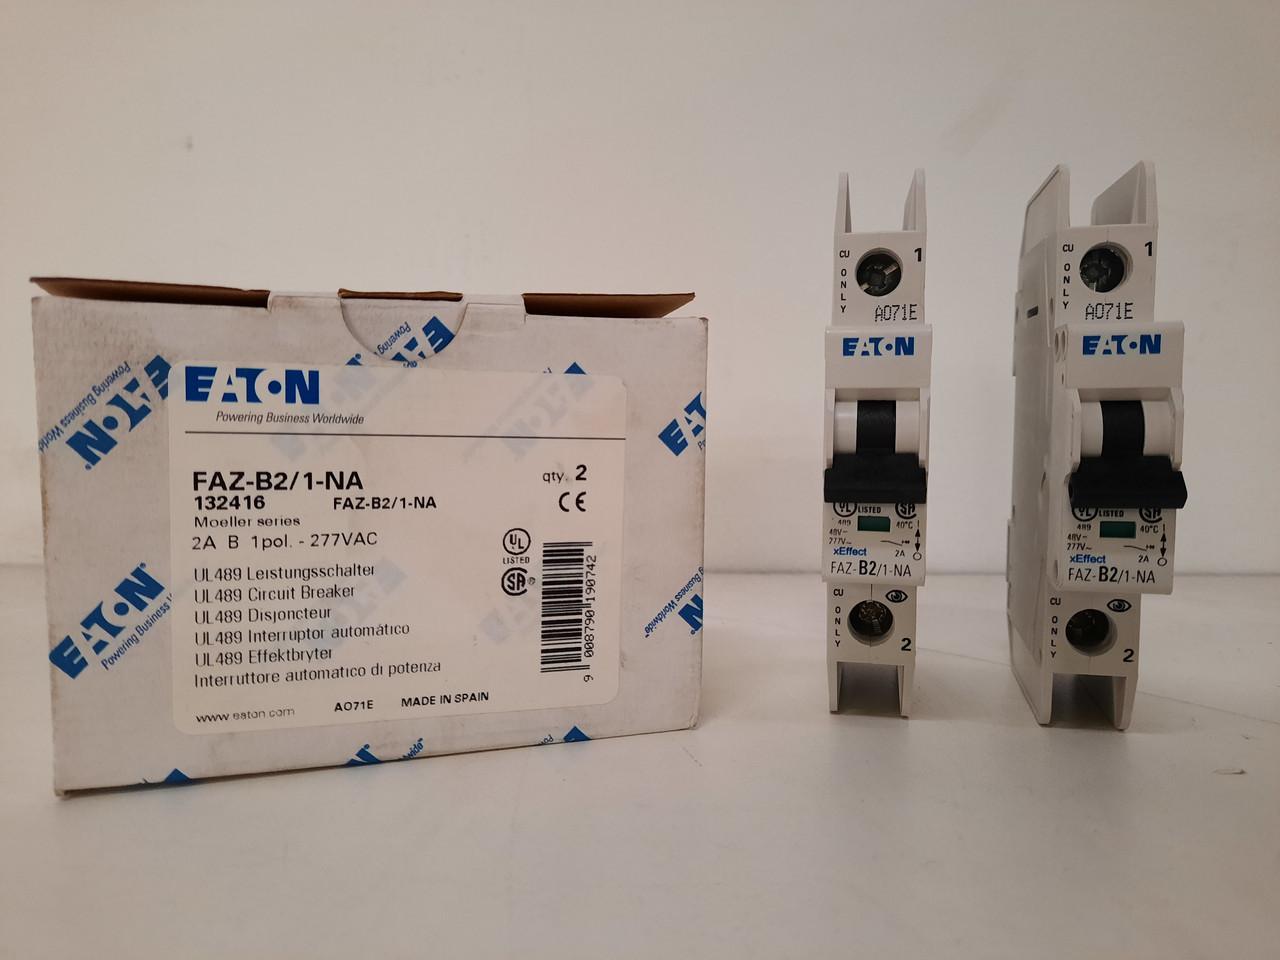 Eaton FAZ-B2/1-NA 277/480 VAC 50/60 Hz, 2 A, 1-Pole, 10/14 kA, 3 to 5 x Rated Current, Screw Terminal, DIN Rail Mount, Standard Packaging, B-Curve, Current Limiting, Thermal Magnetic